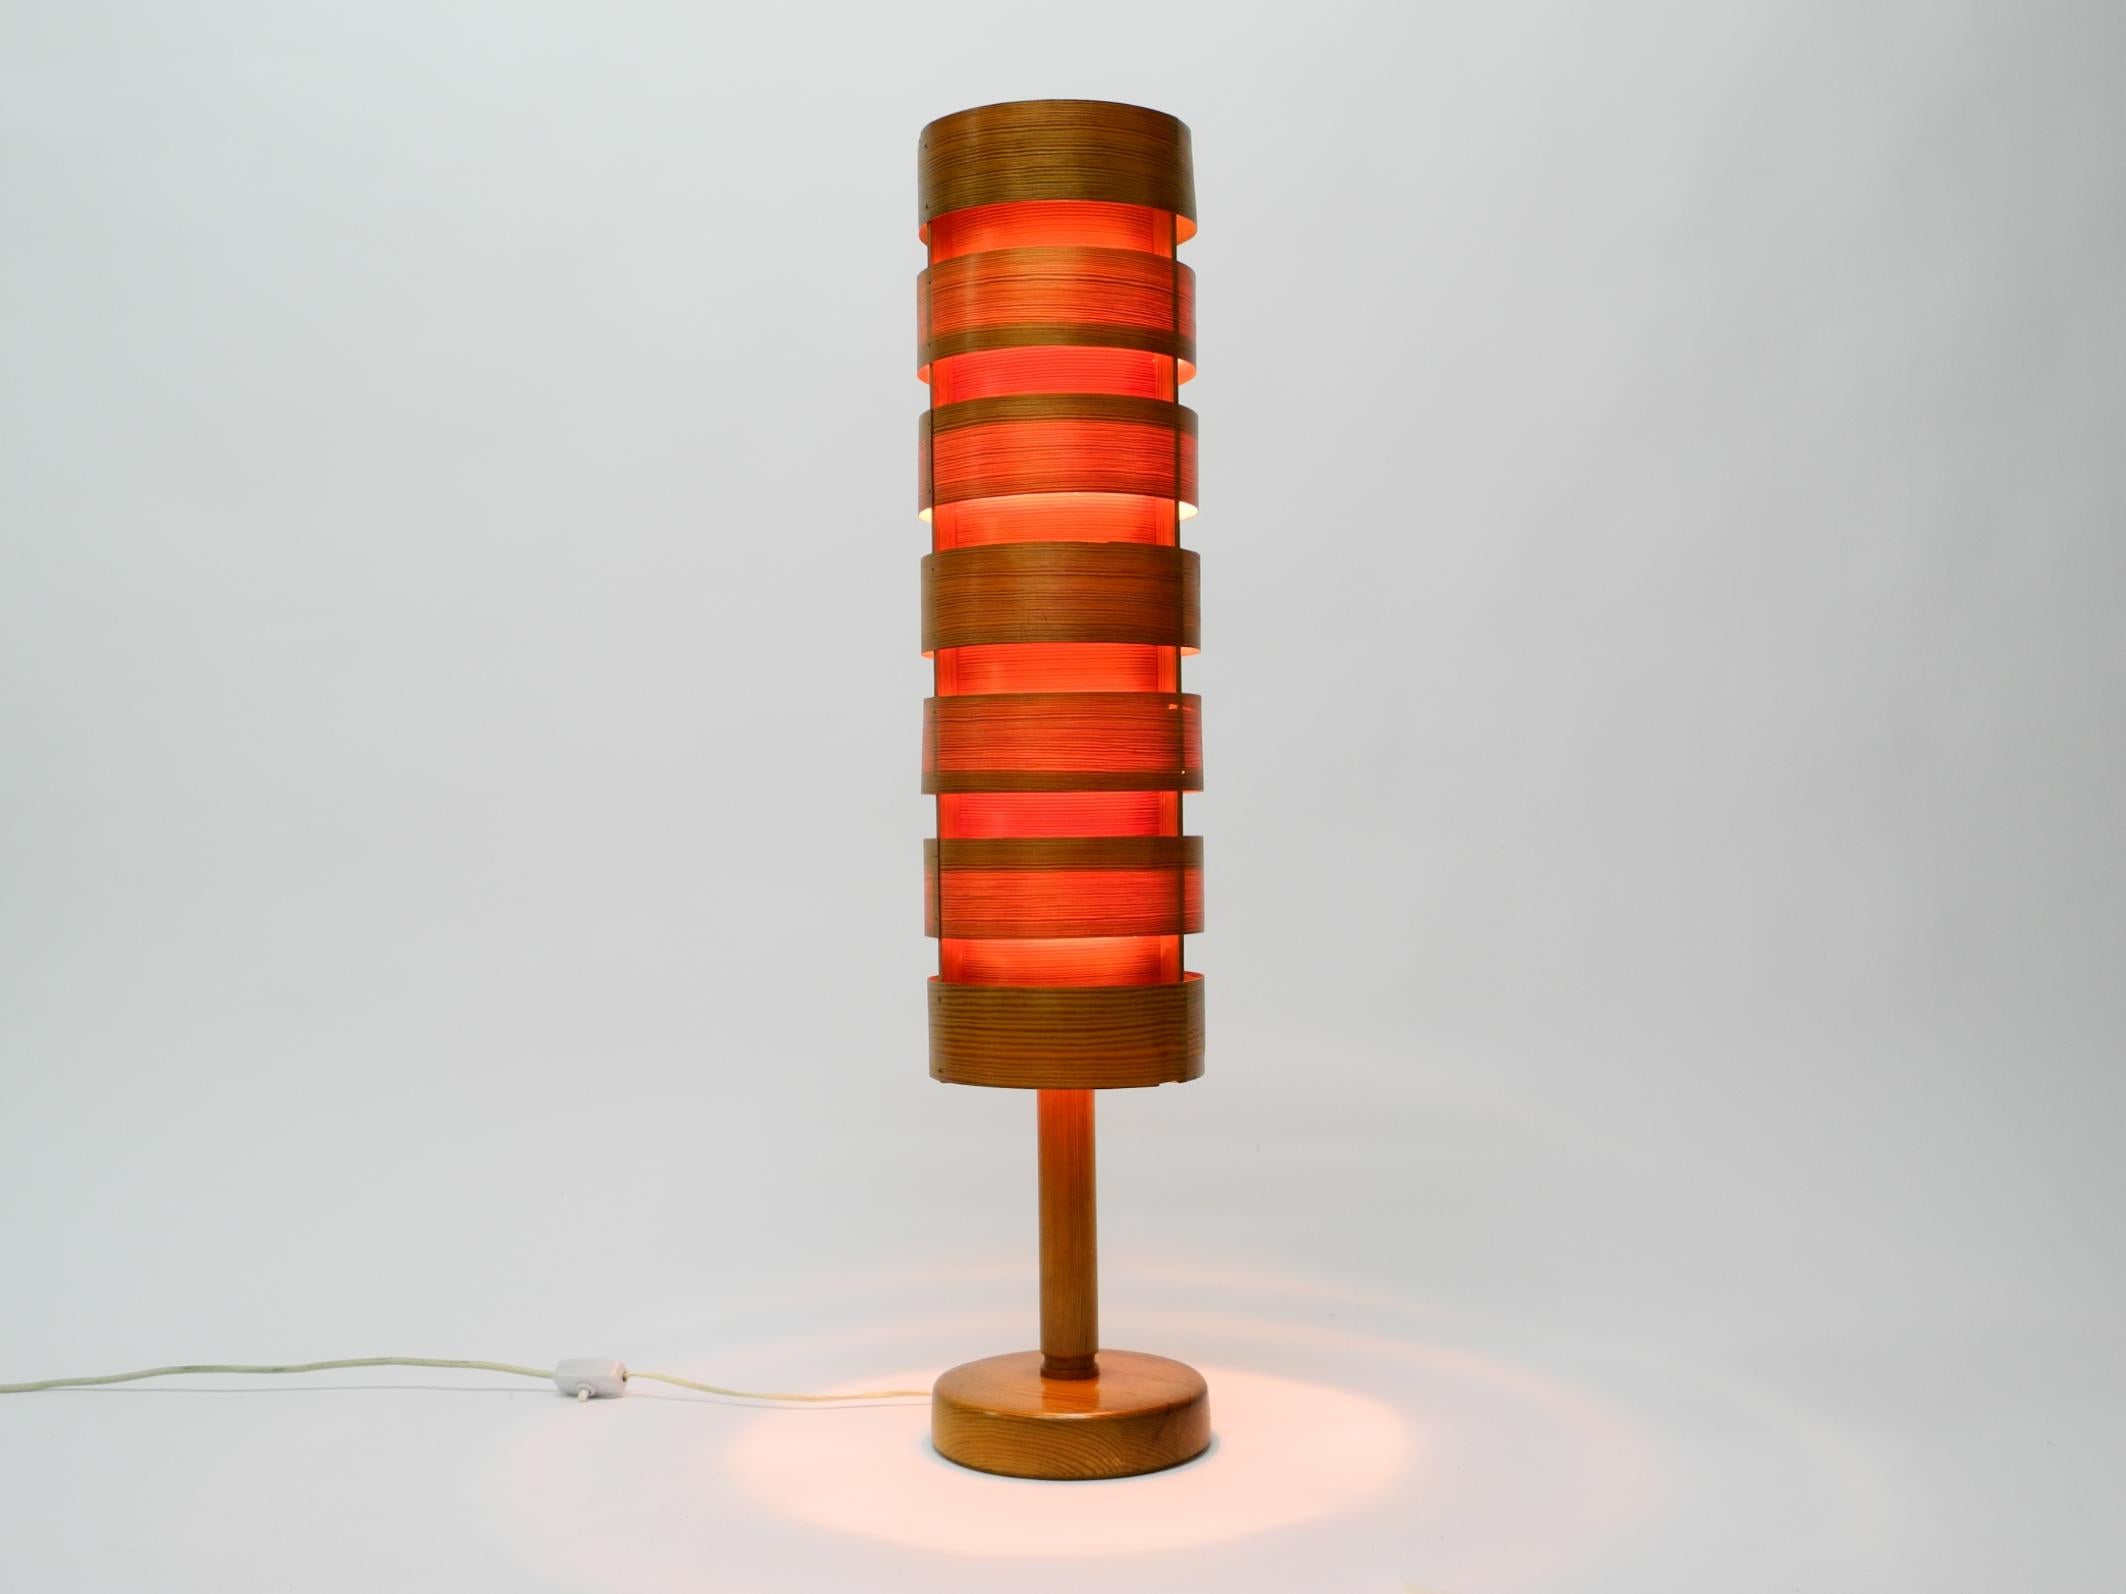 Beautiful very rare 1960s pine veneer slatted floor lamp. Design by Hans Agne Jakobsson for Markaryd. Made in Sweden.
Beautiful Swedish classic from the 1960s.
Heavy foot for stability. Good vintage condition and fully functional.
There are three